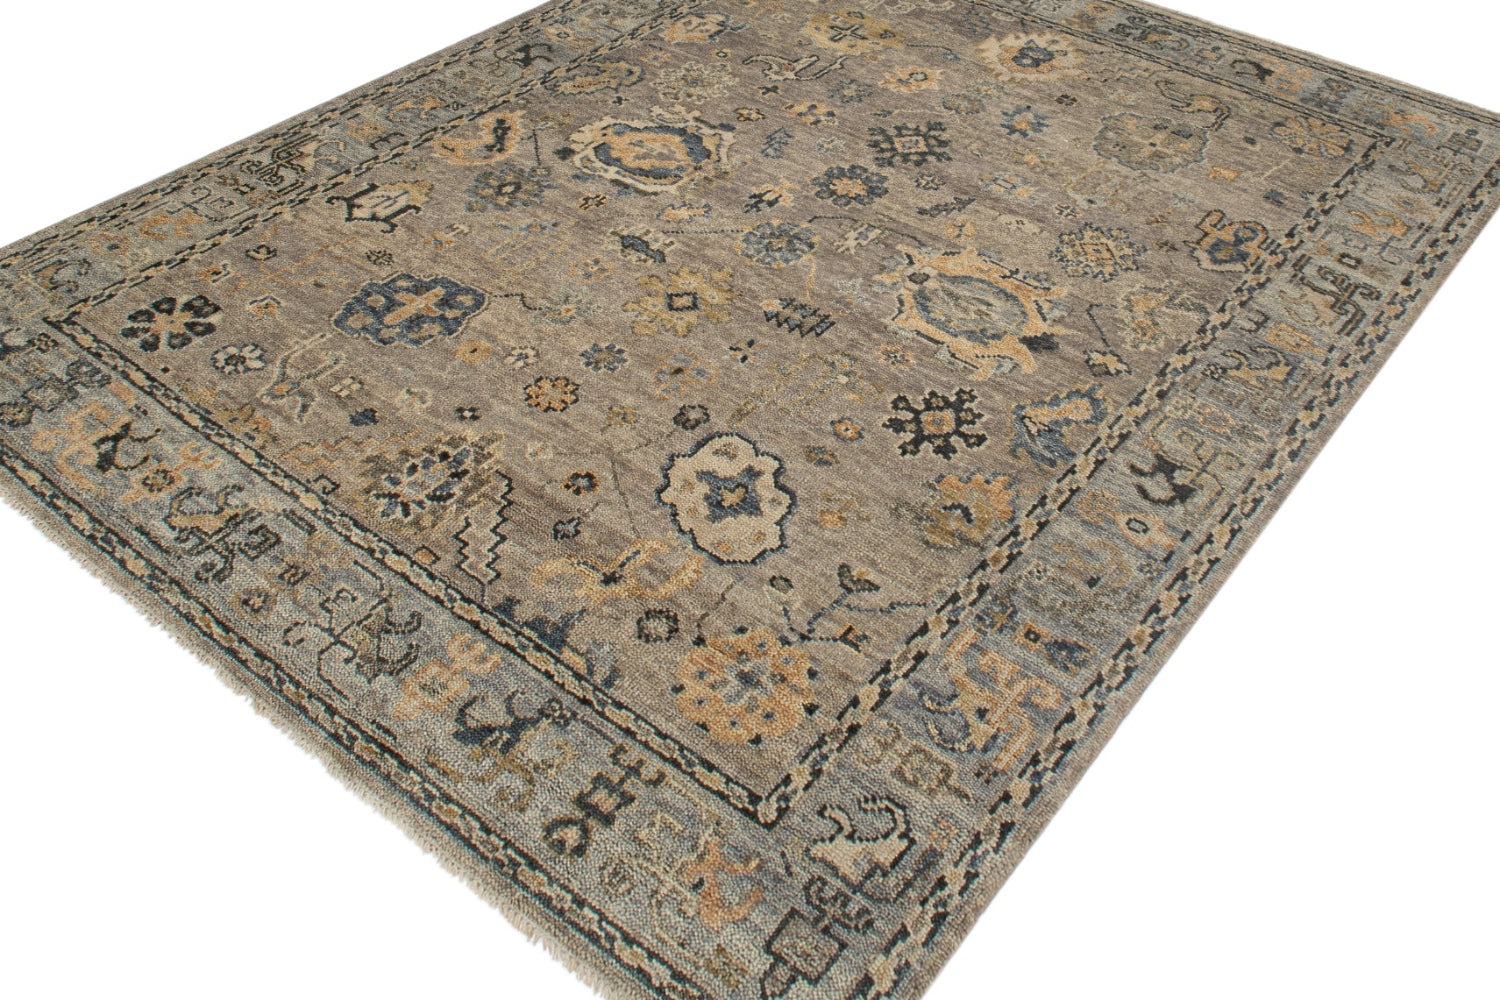 Sultanabad 4 Handwoven Traditional Rug, J71708